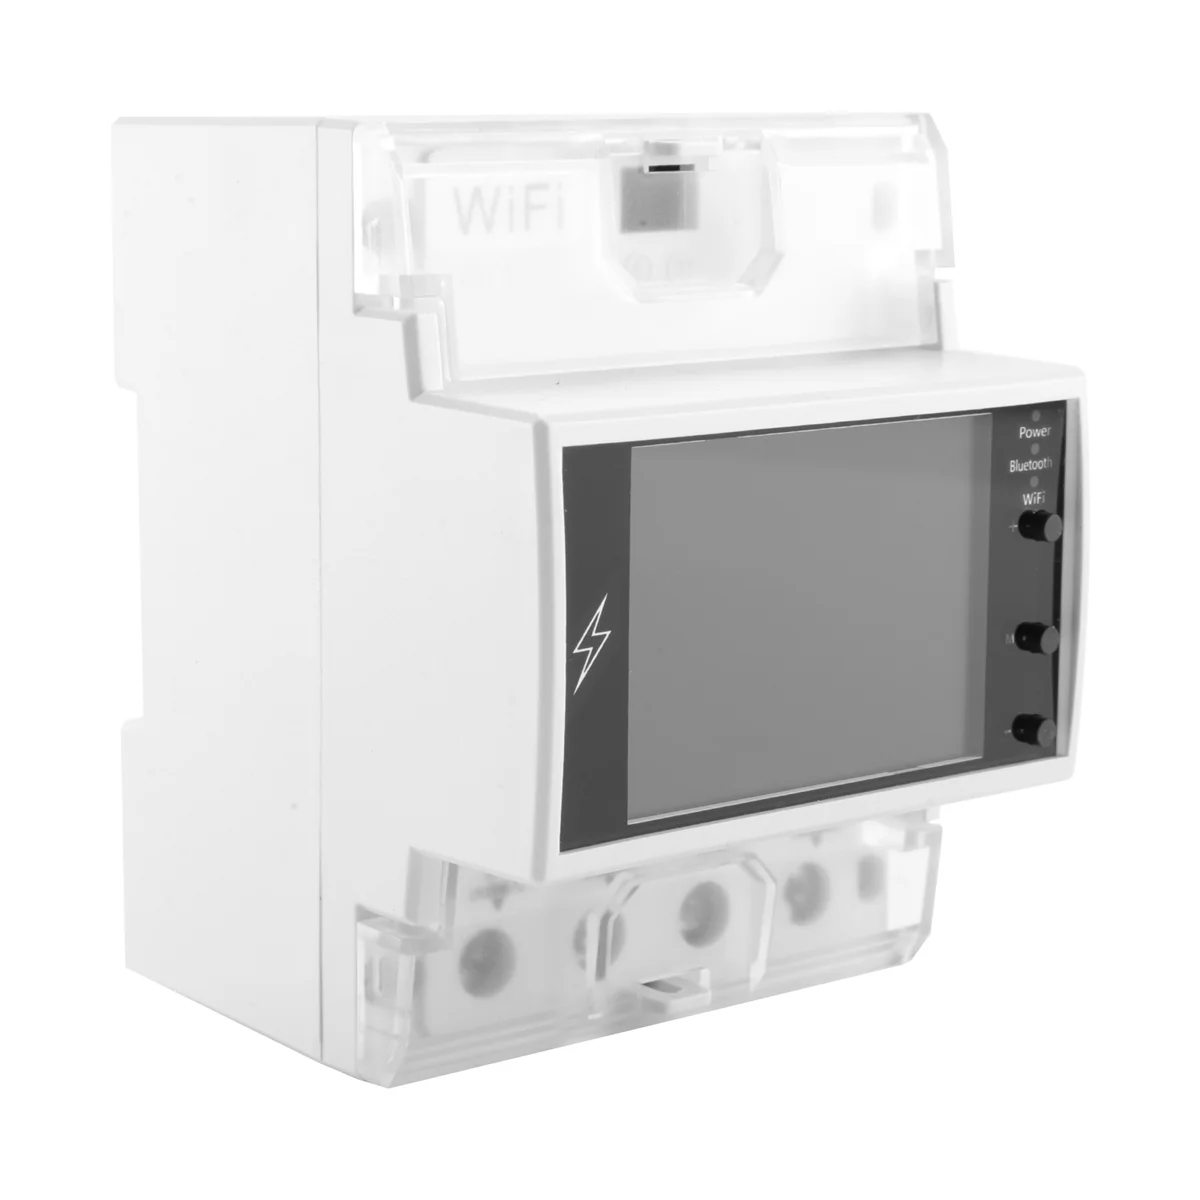 

AT4PW 100A Tuya WIFI Din Rail Smart Meter AC 220V 110V Digital Energy Meter Voltage Power Electric Power Monitor